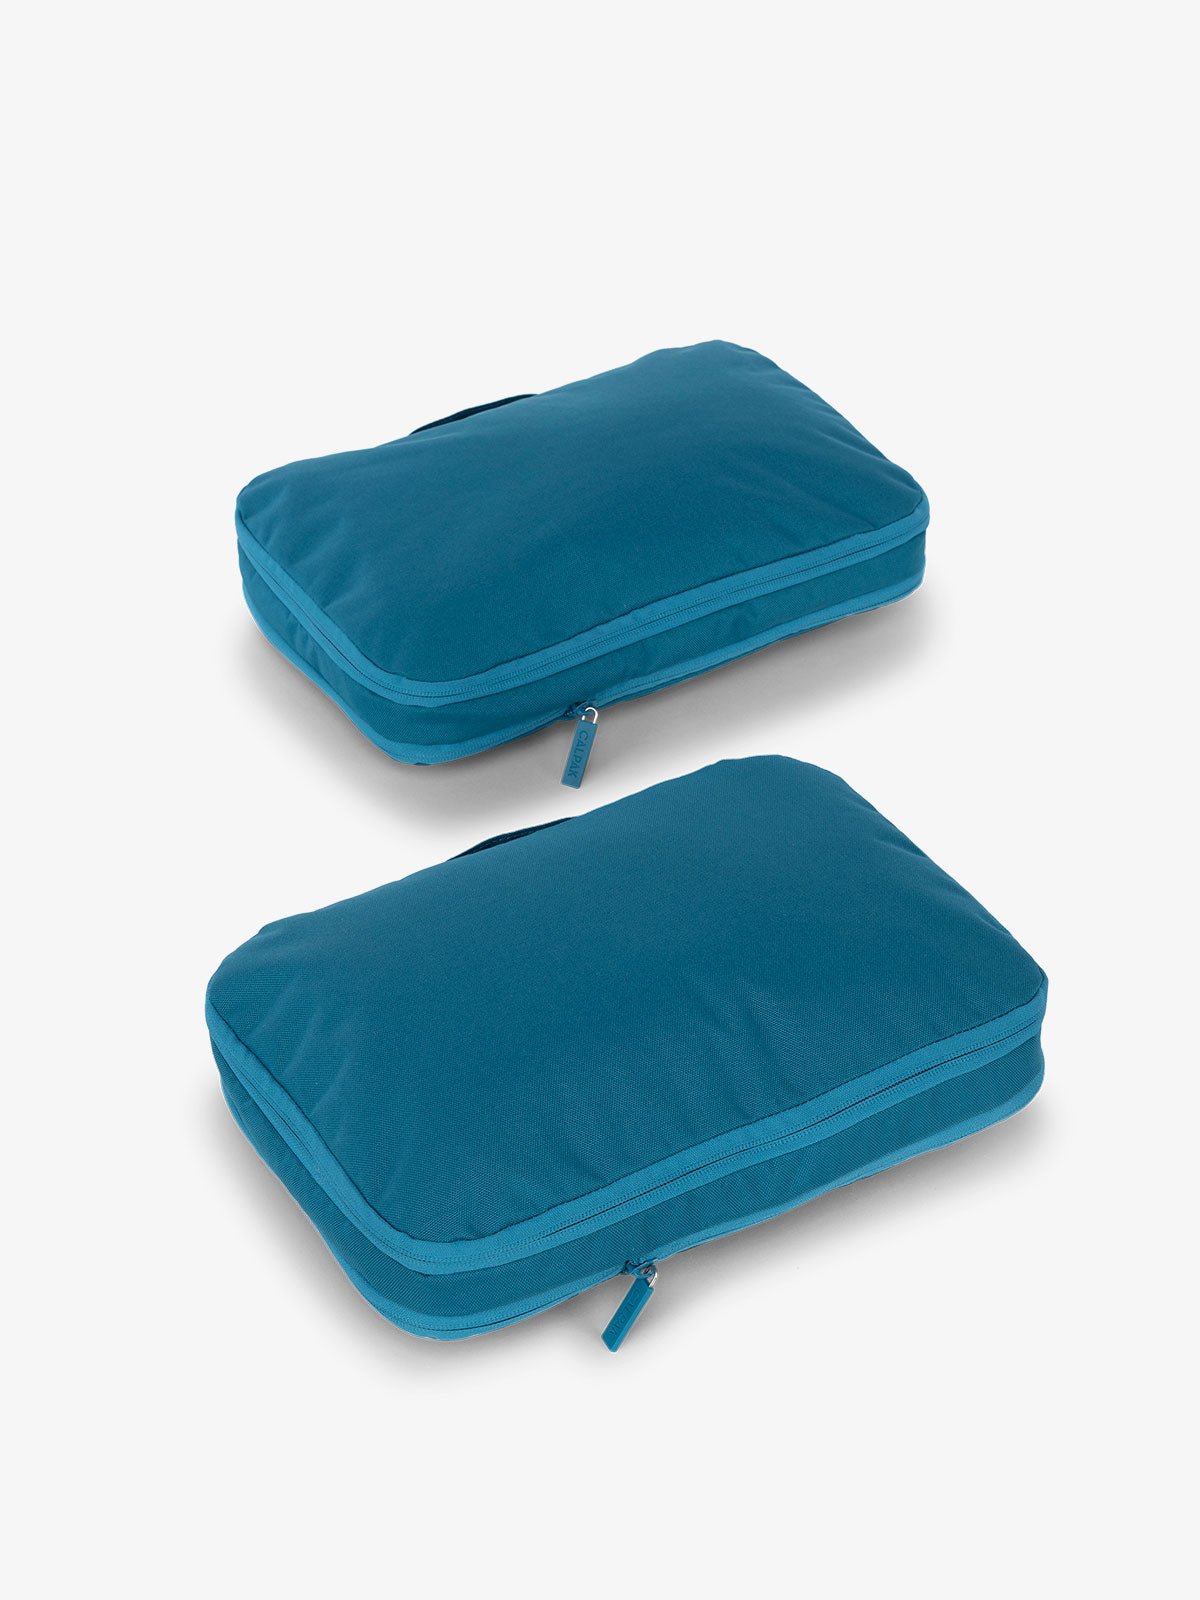 CALPAK compression packing cubes in lagoon